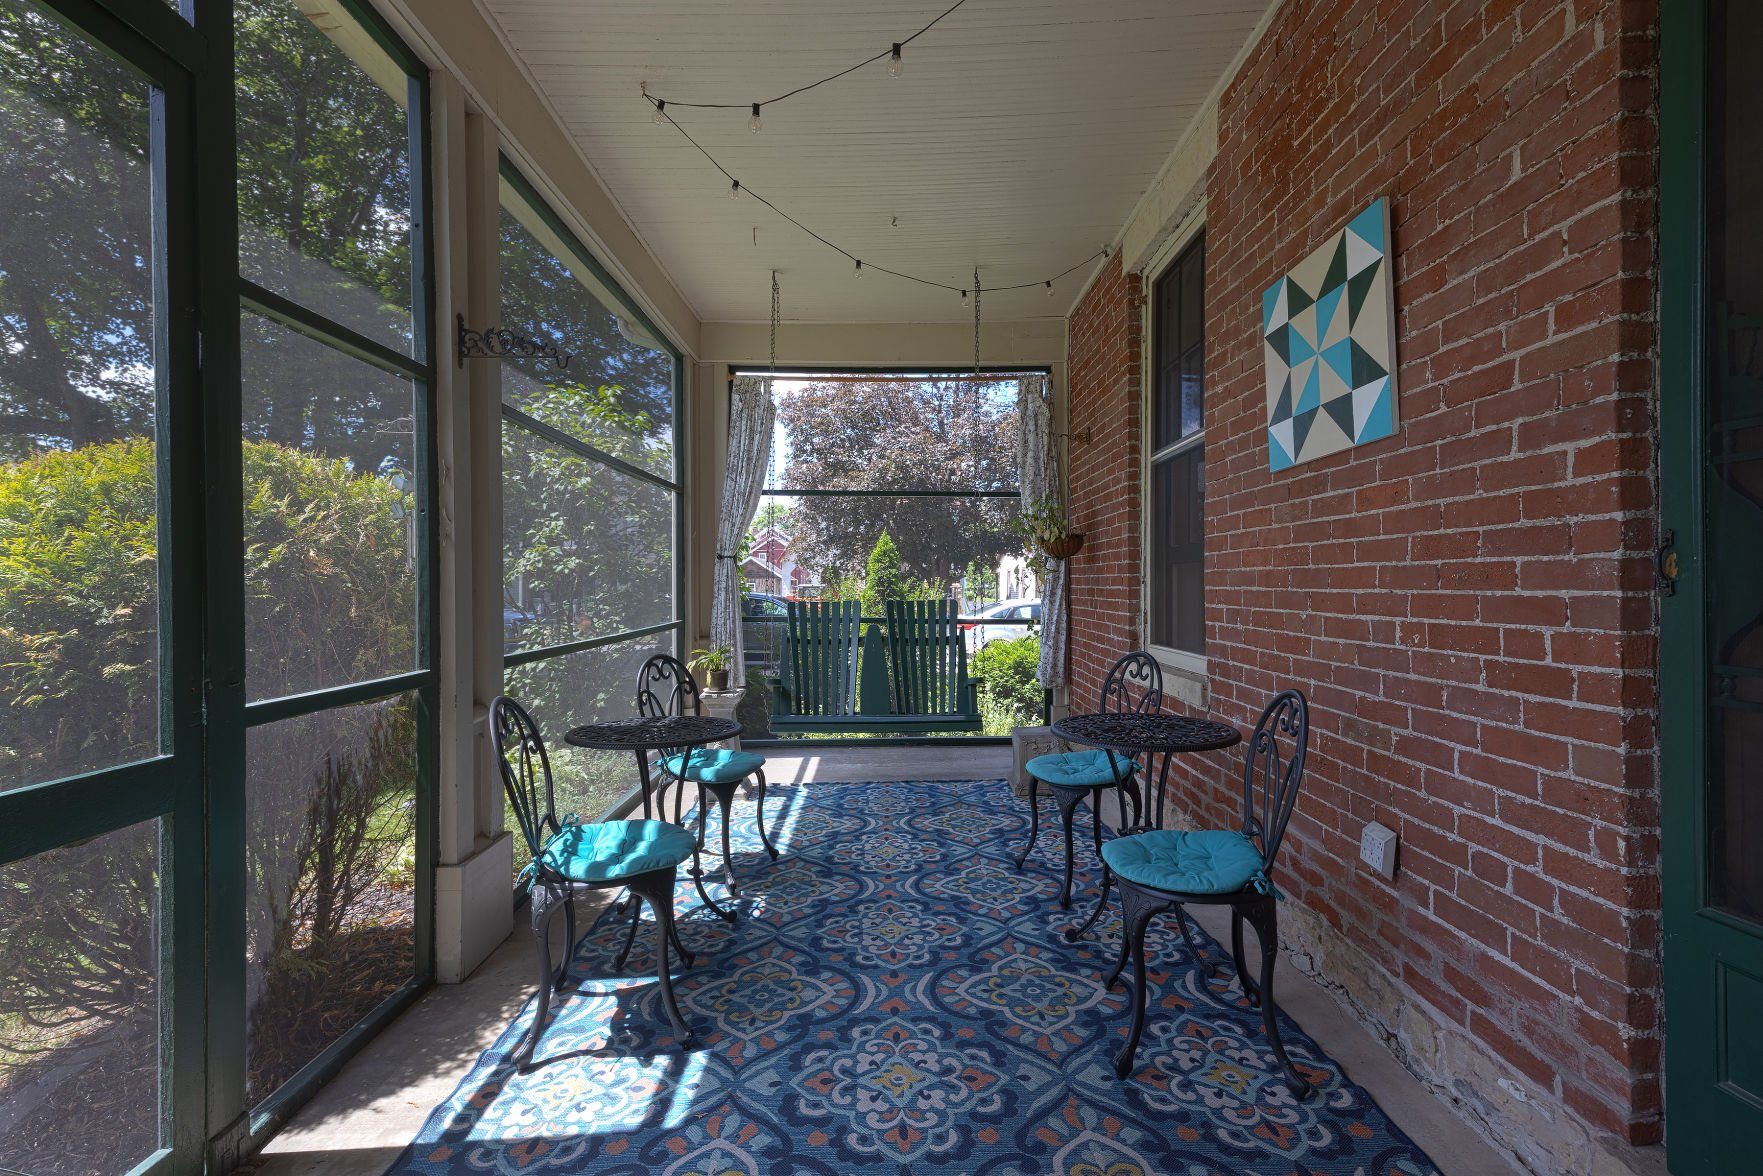 A screened in porch at the Aldrich Guest House in Galena, Ill.    PHOTO CREDIT: Stephen Gassman